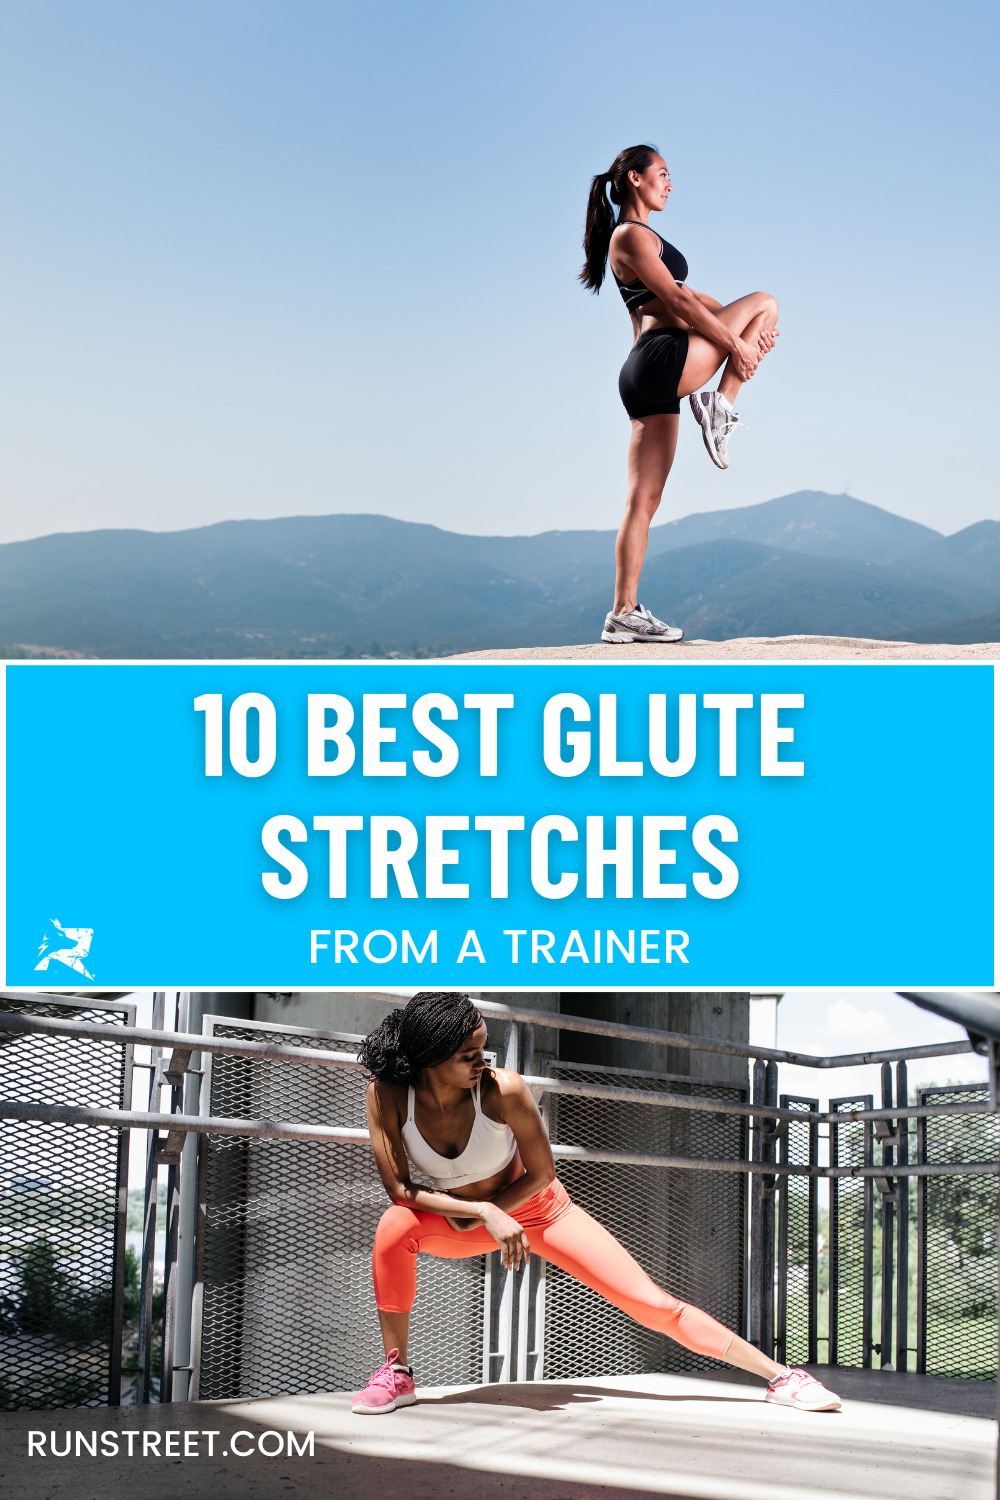 Trainers Say These Are The Best Stretches For Toning Your Glutes